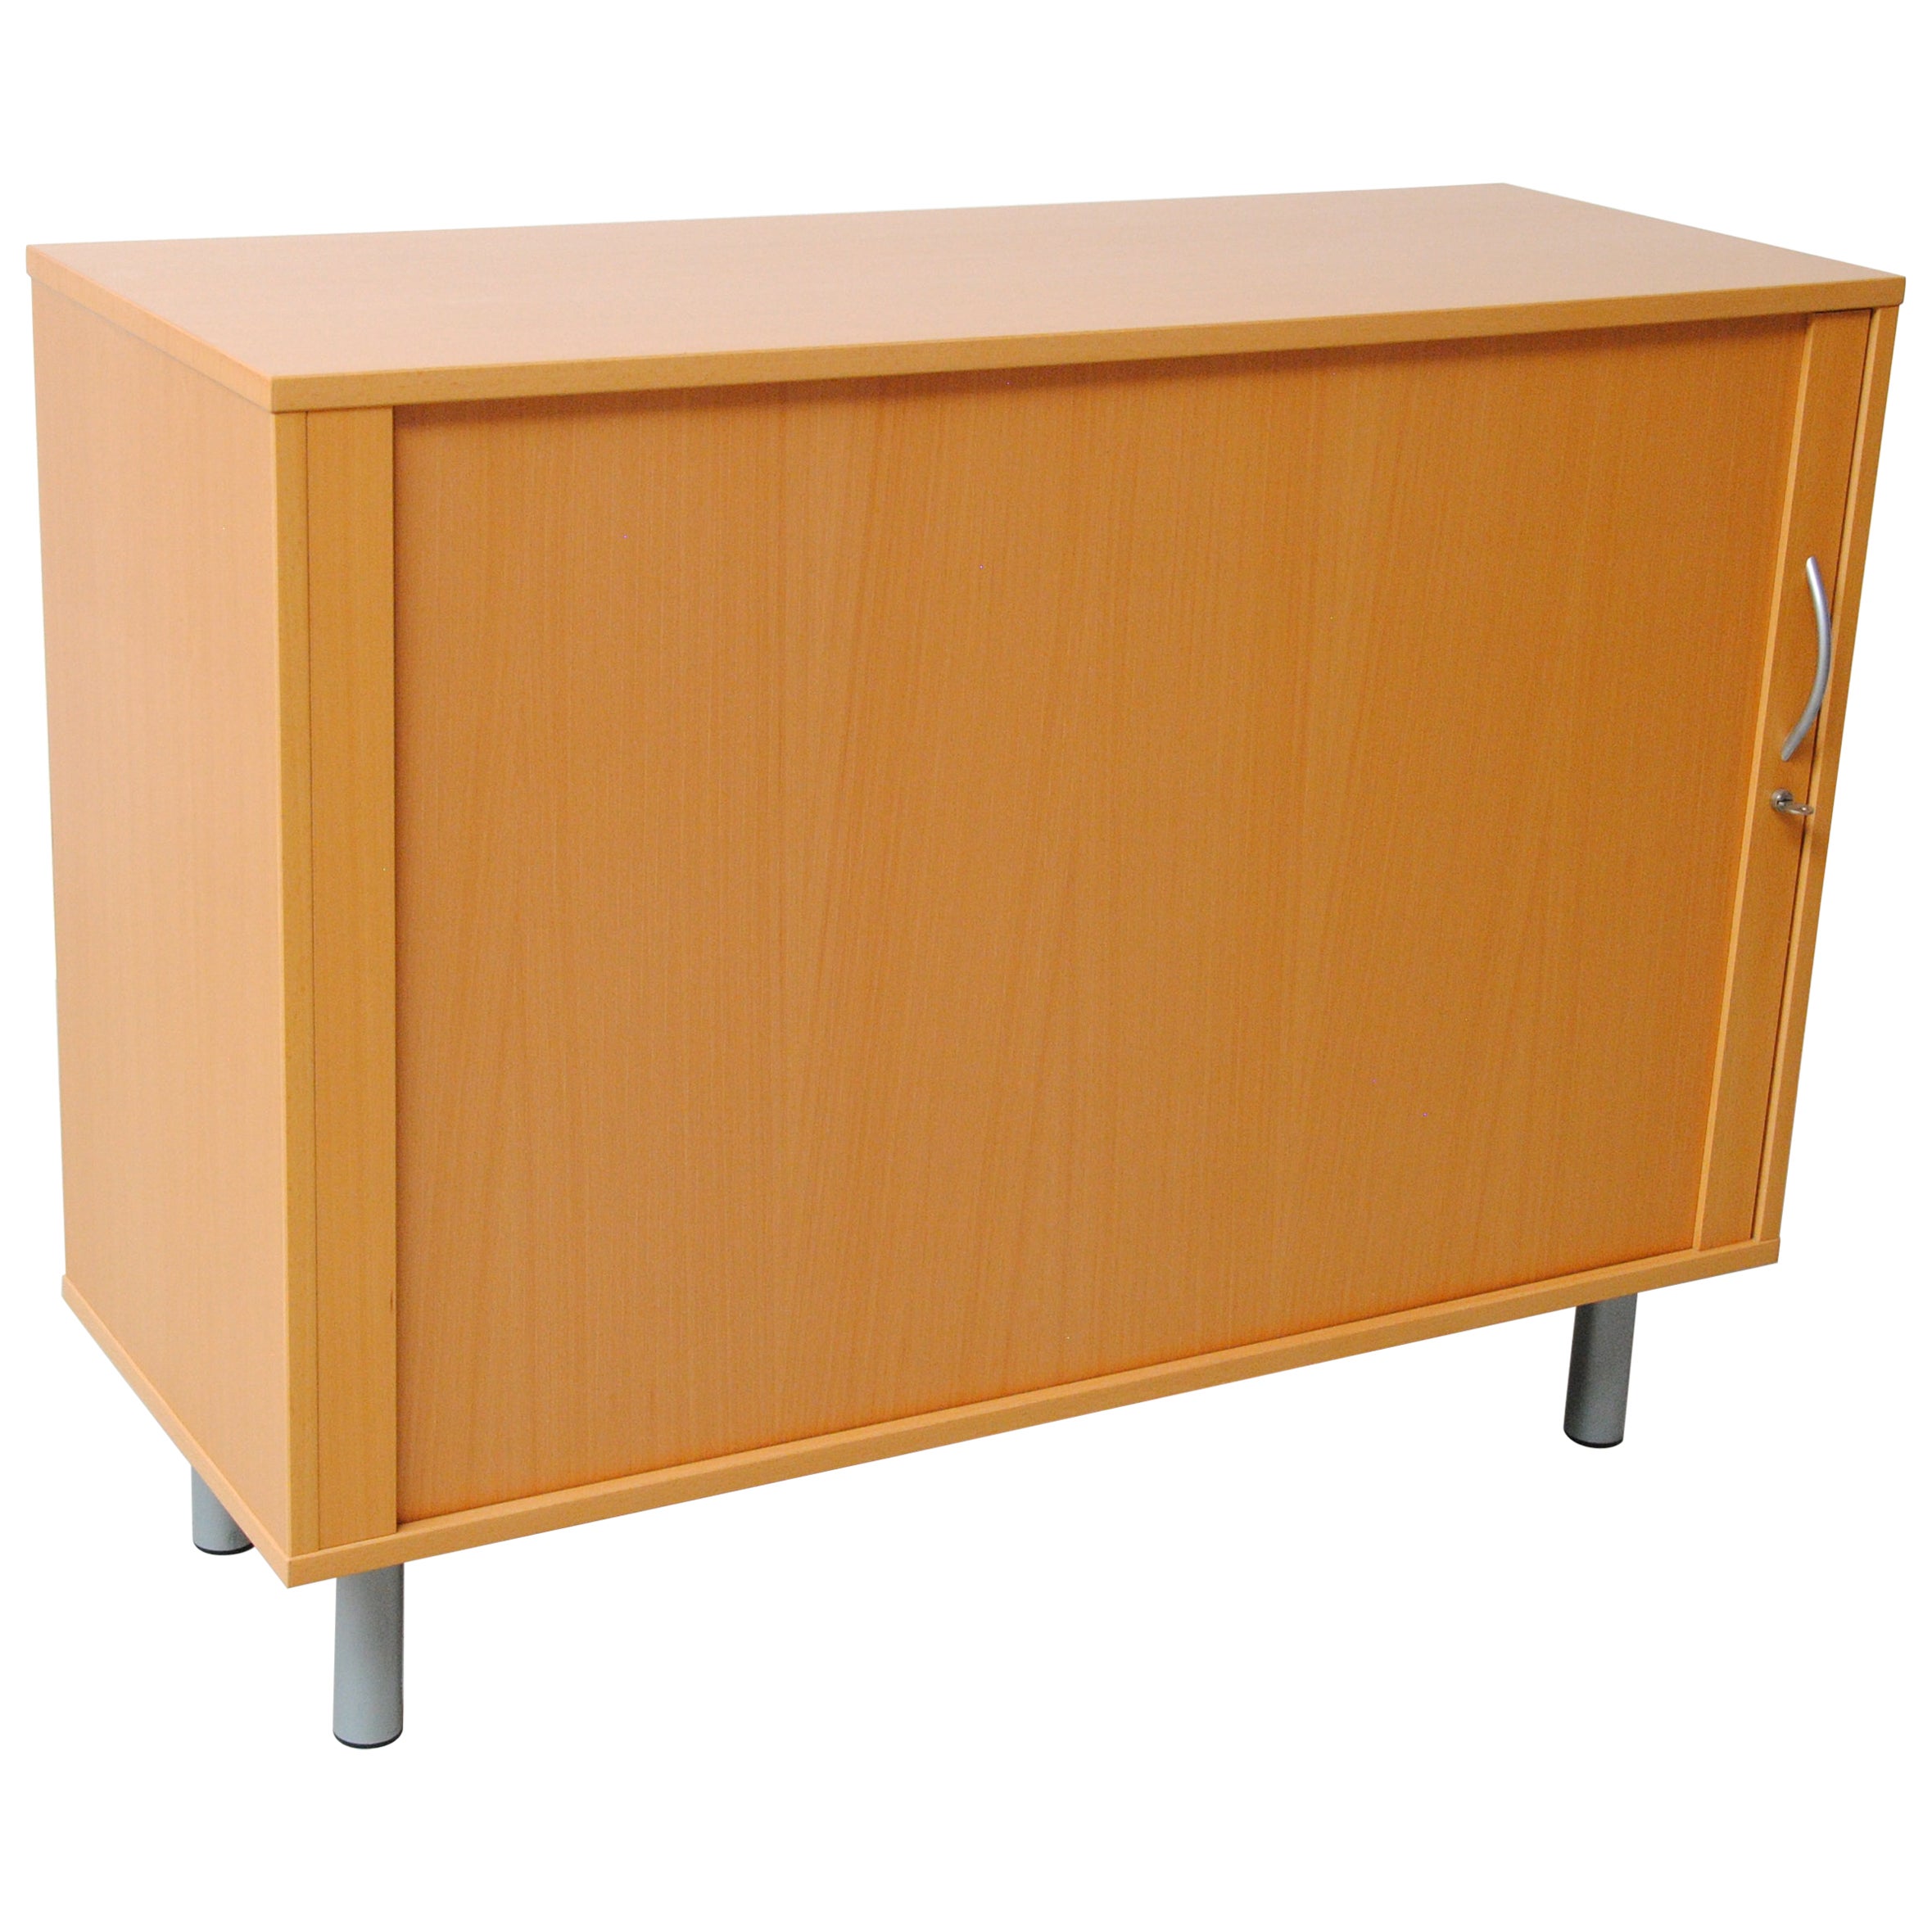 Danish Bent Silberg Beech Cabinets with Jealousy Doors by Bent Silberg Mobler For Sale